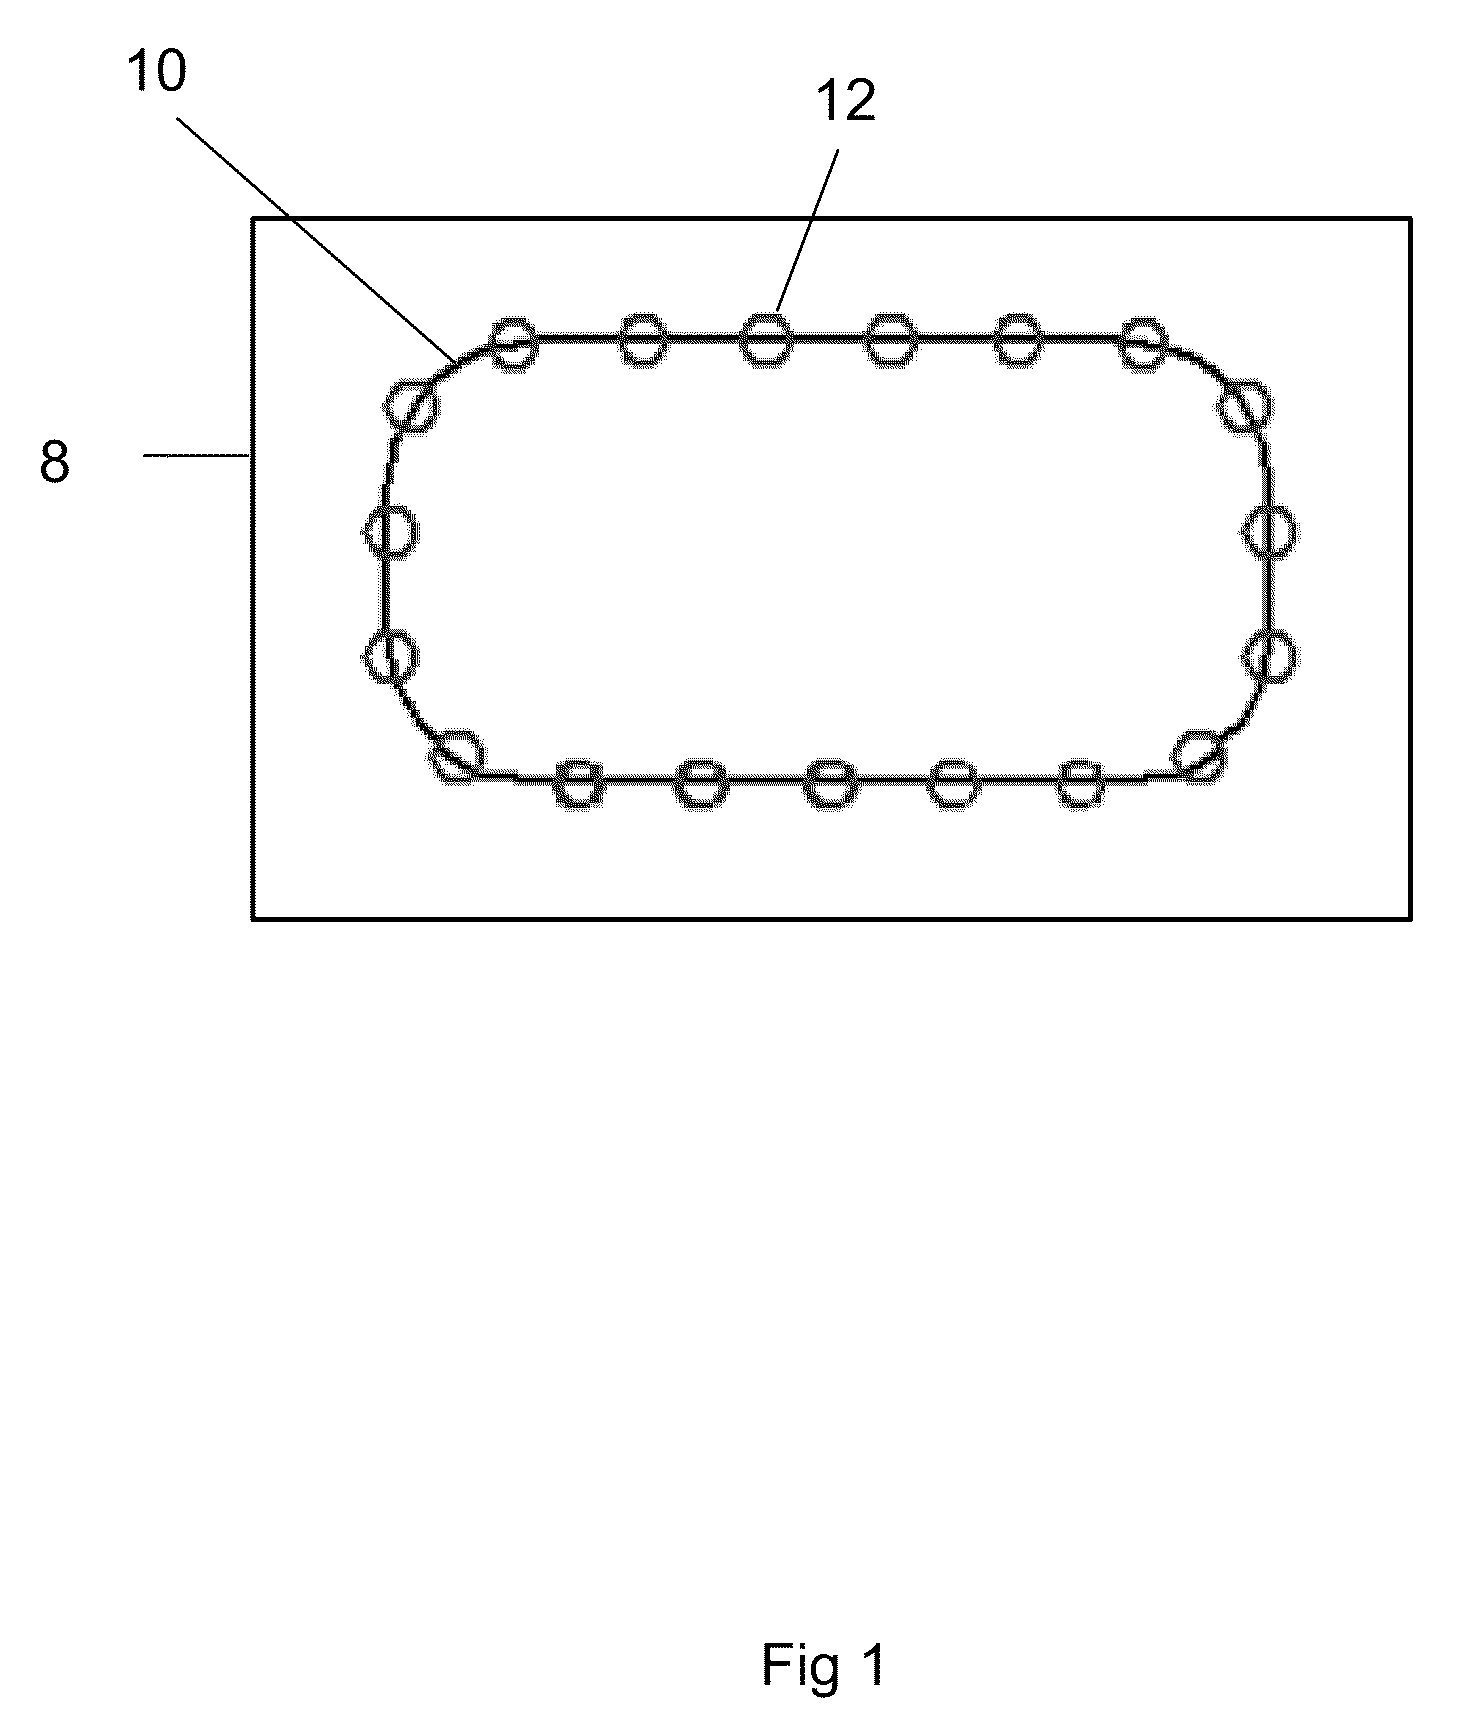 Method for improved brittle materials processing